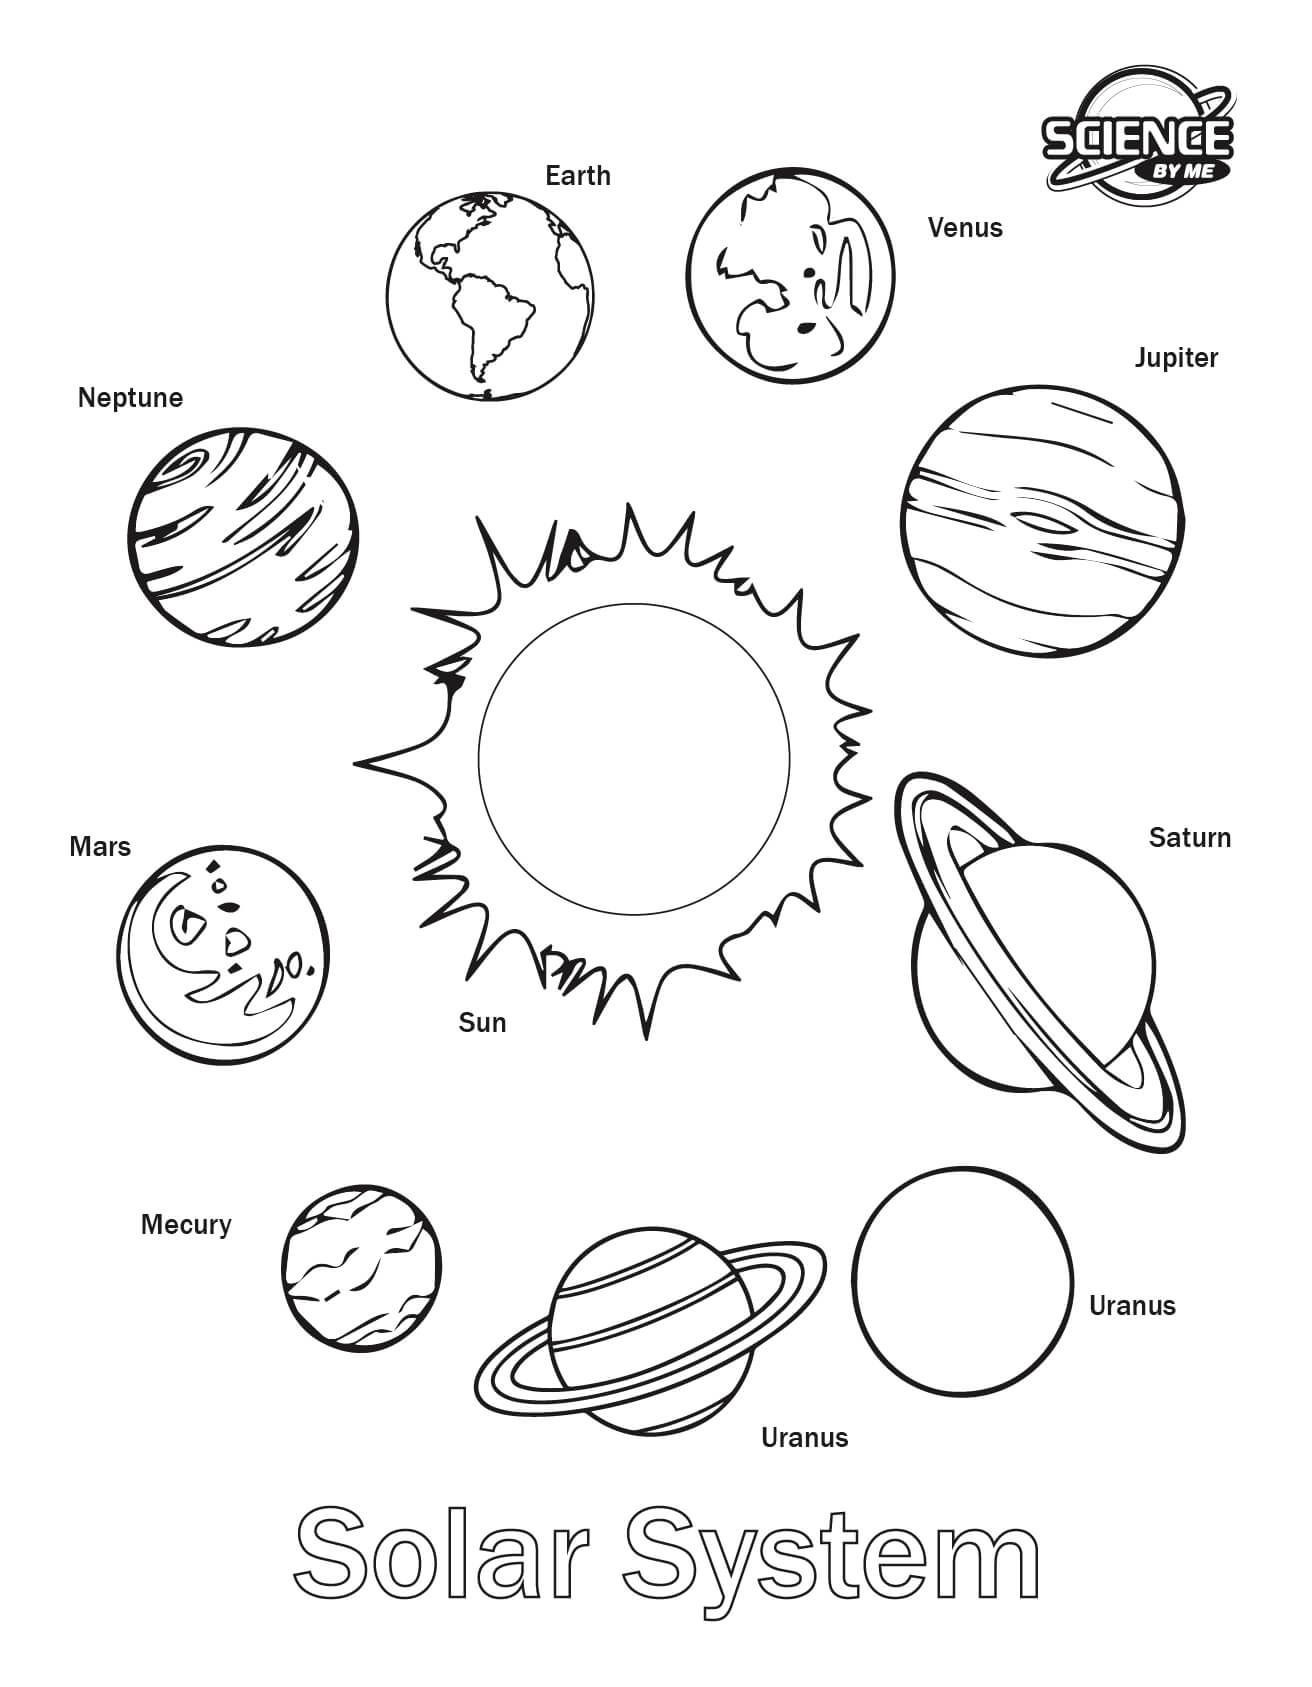 Sponges A Coloring Worksheet Coloring Pages Planets solar System 2020 Check More at